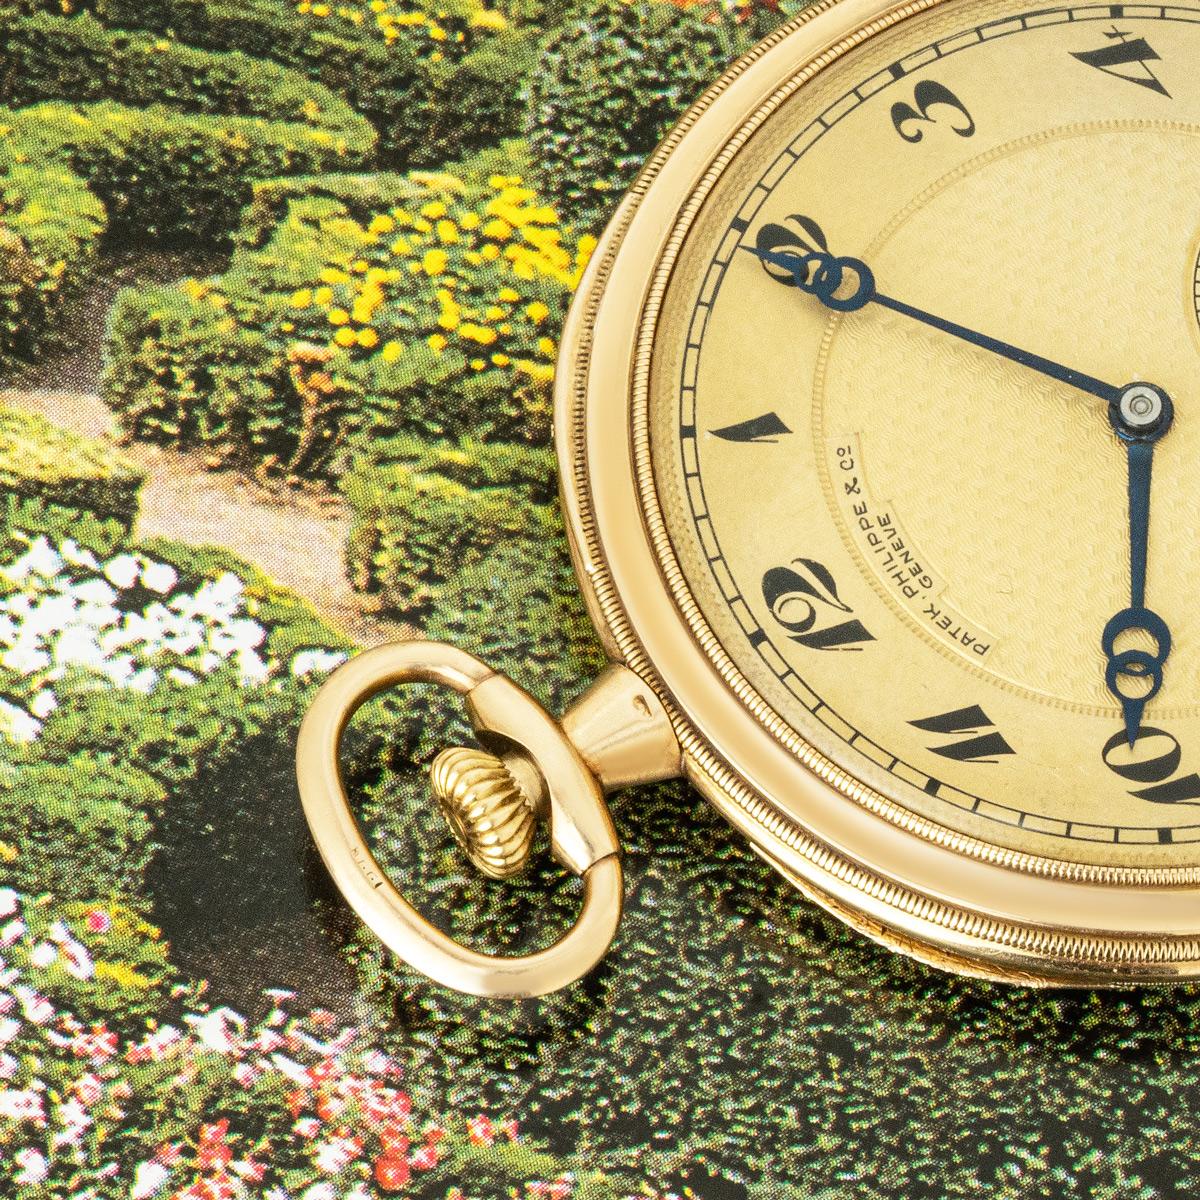 Patek Philippe. A 14ct Yellow Gold Keyless Lever Louis XVI Style Open Face Pocket Watch C1914

Dial: The unusual silver gilt engine turned dial signed Patek Philippe & Co Geneve with Breguet numerals outer minute track and subsidiary seconds dial at